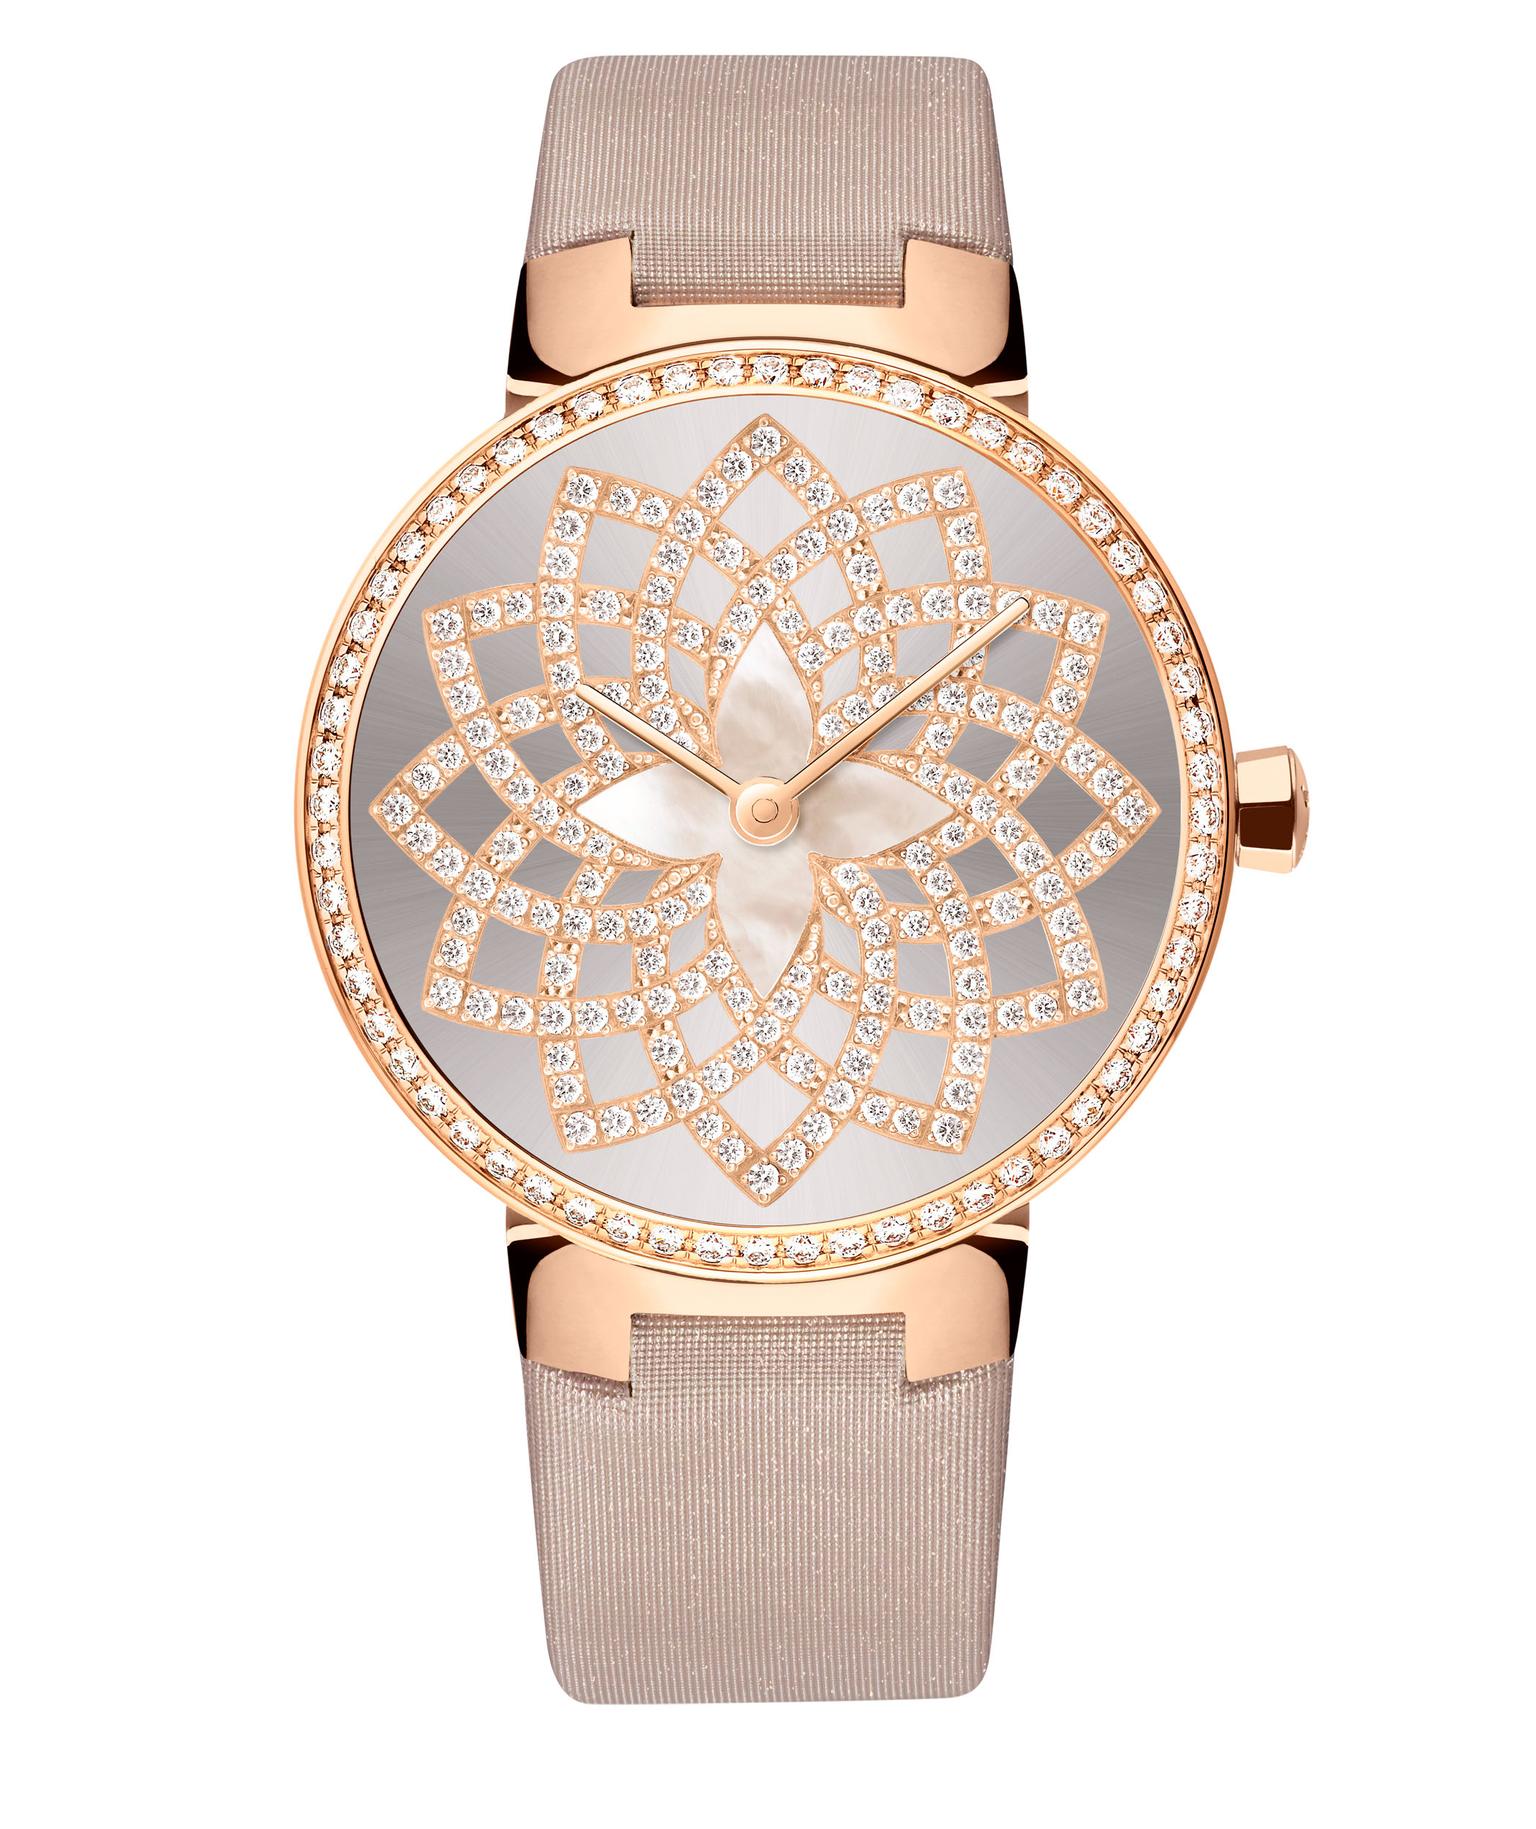 Louis Vuitton - Tambour with Exquisite Rose Gold and White Flower